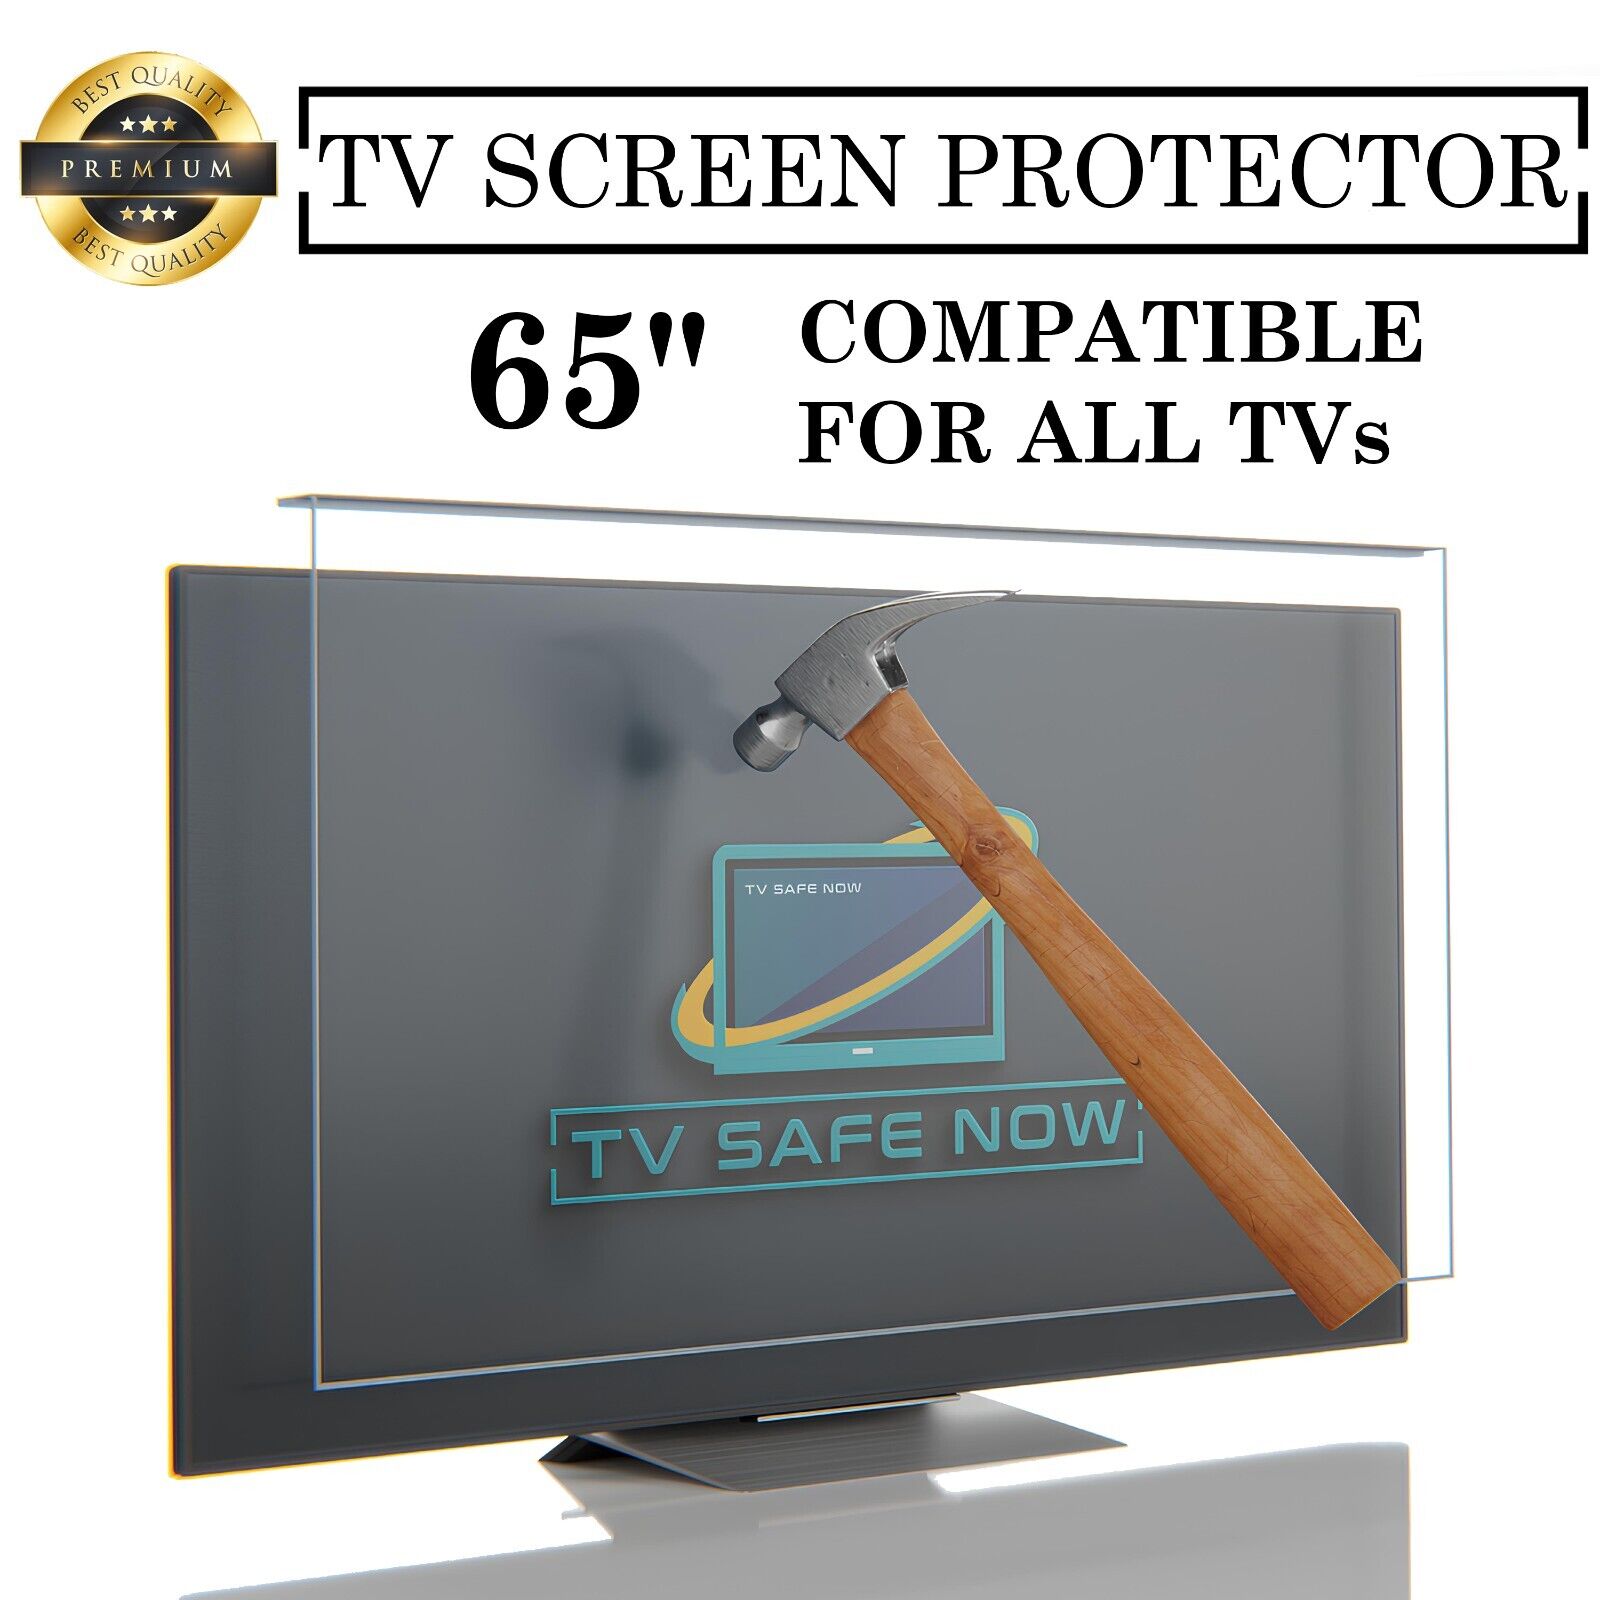 TVSAFENOW TV Screen Protector for 65 inch TVs, Special Dimensions for All Models